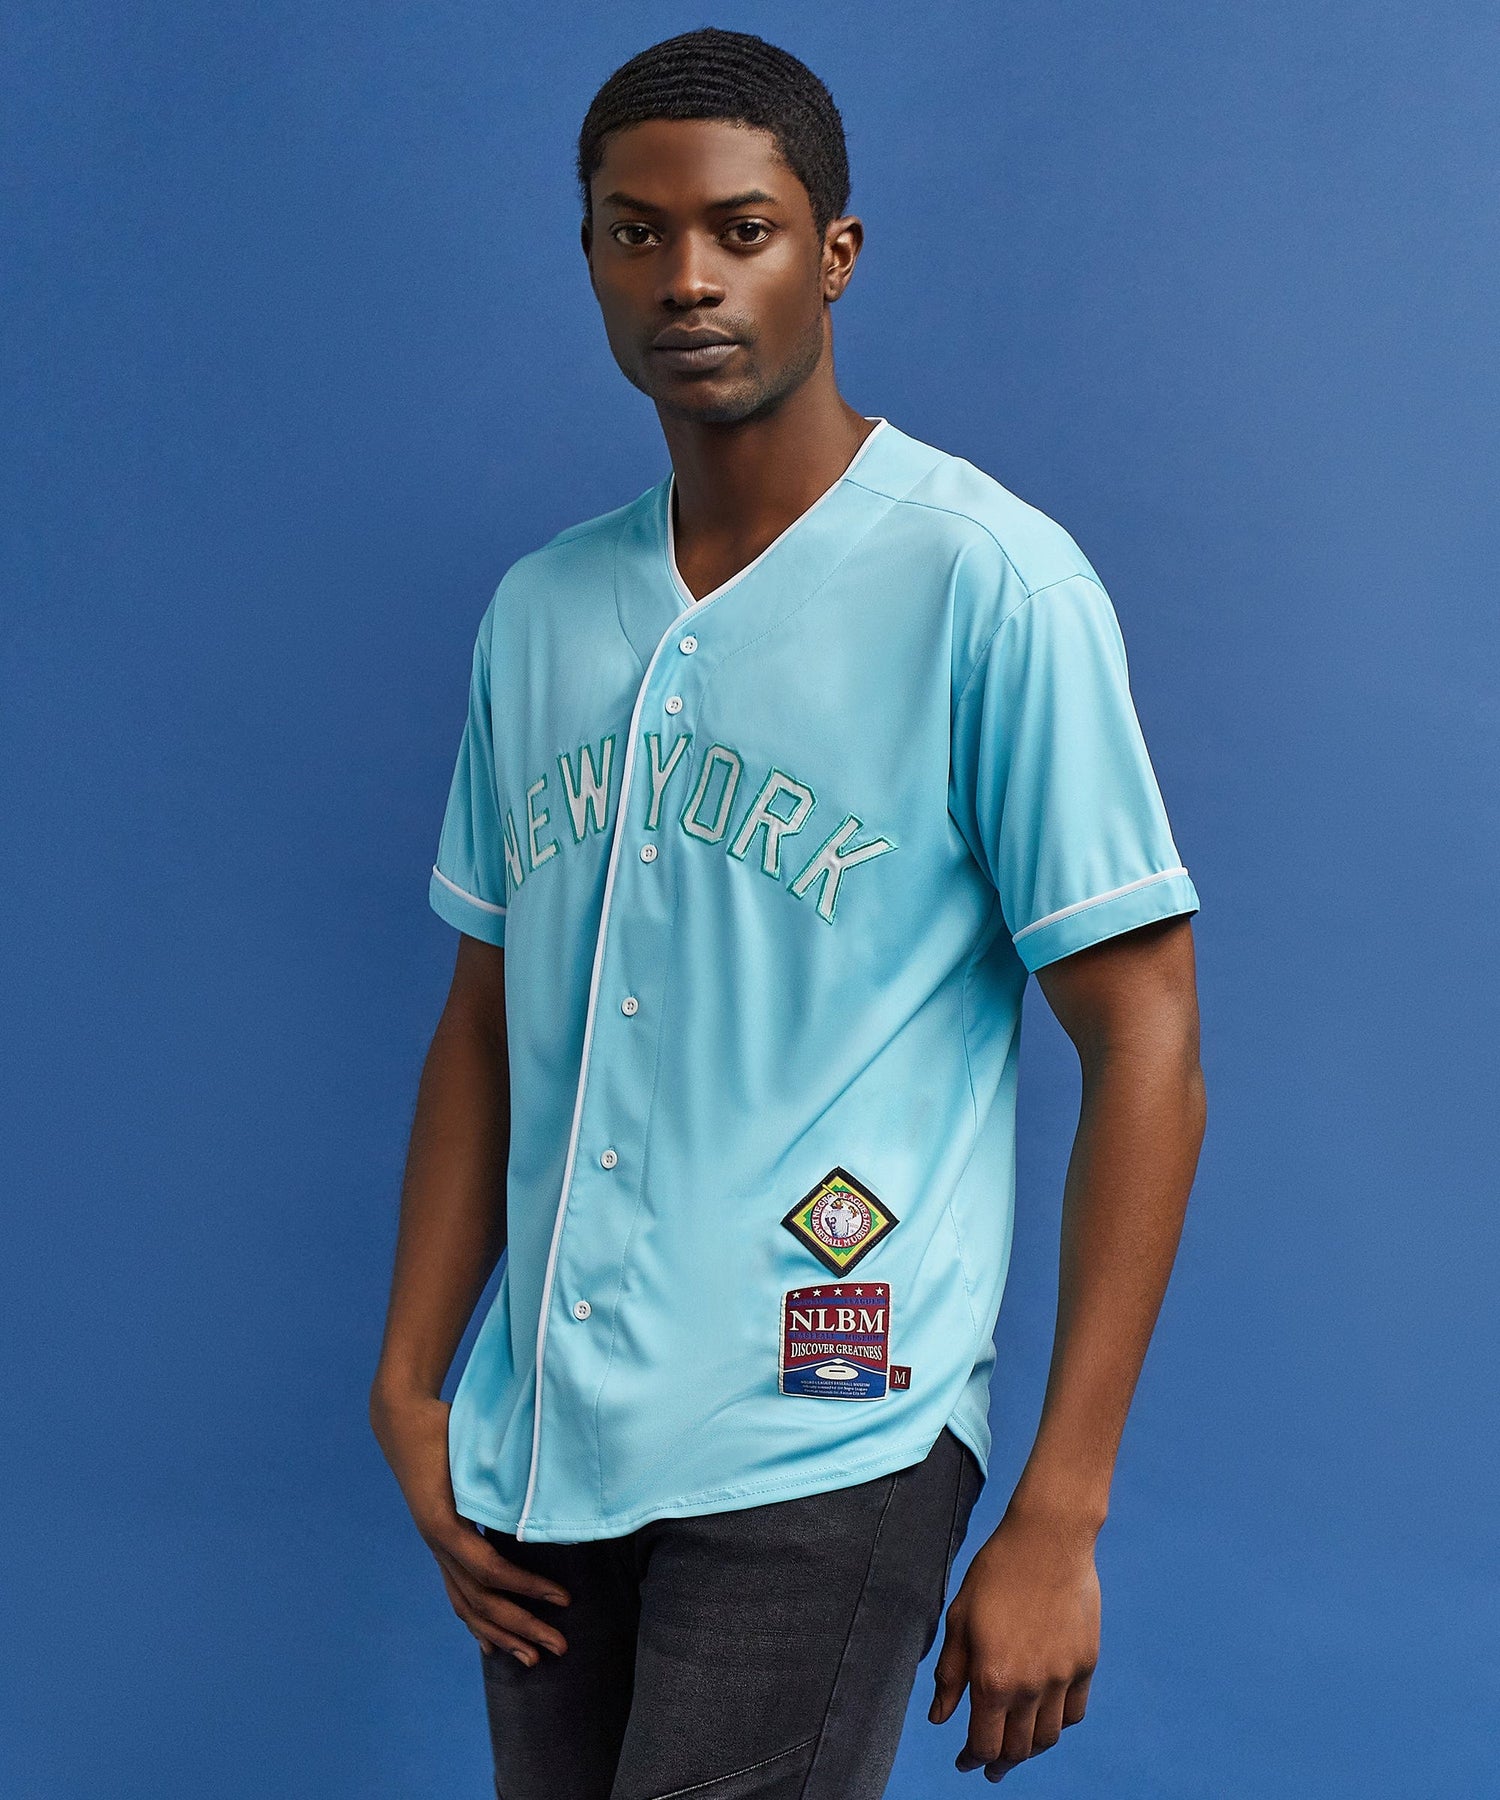 Toronto Blue Jays Majestic Cooperstown Collection Peak Power Fashion Jersey  - Light Blue/Navy